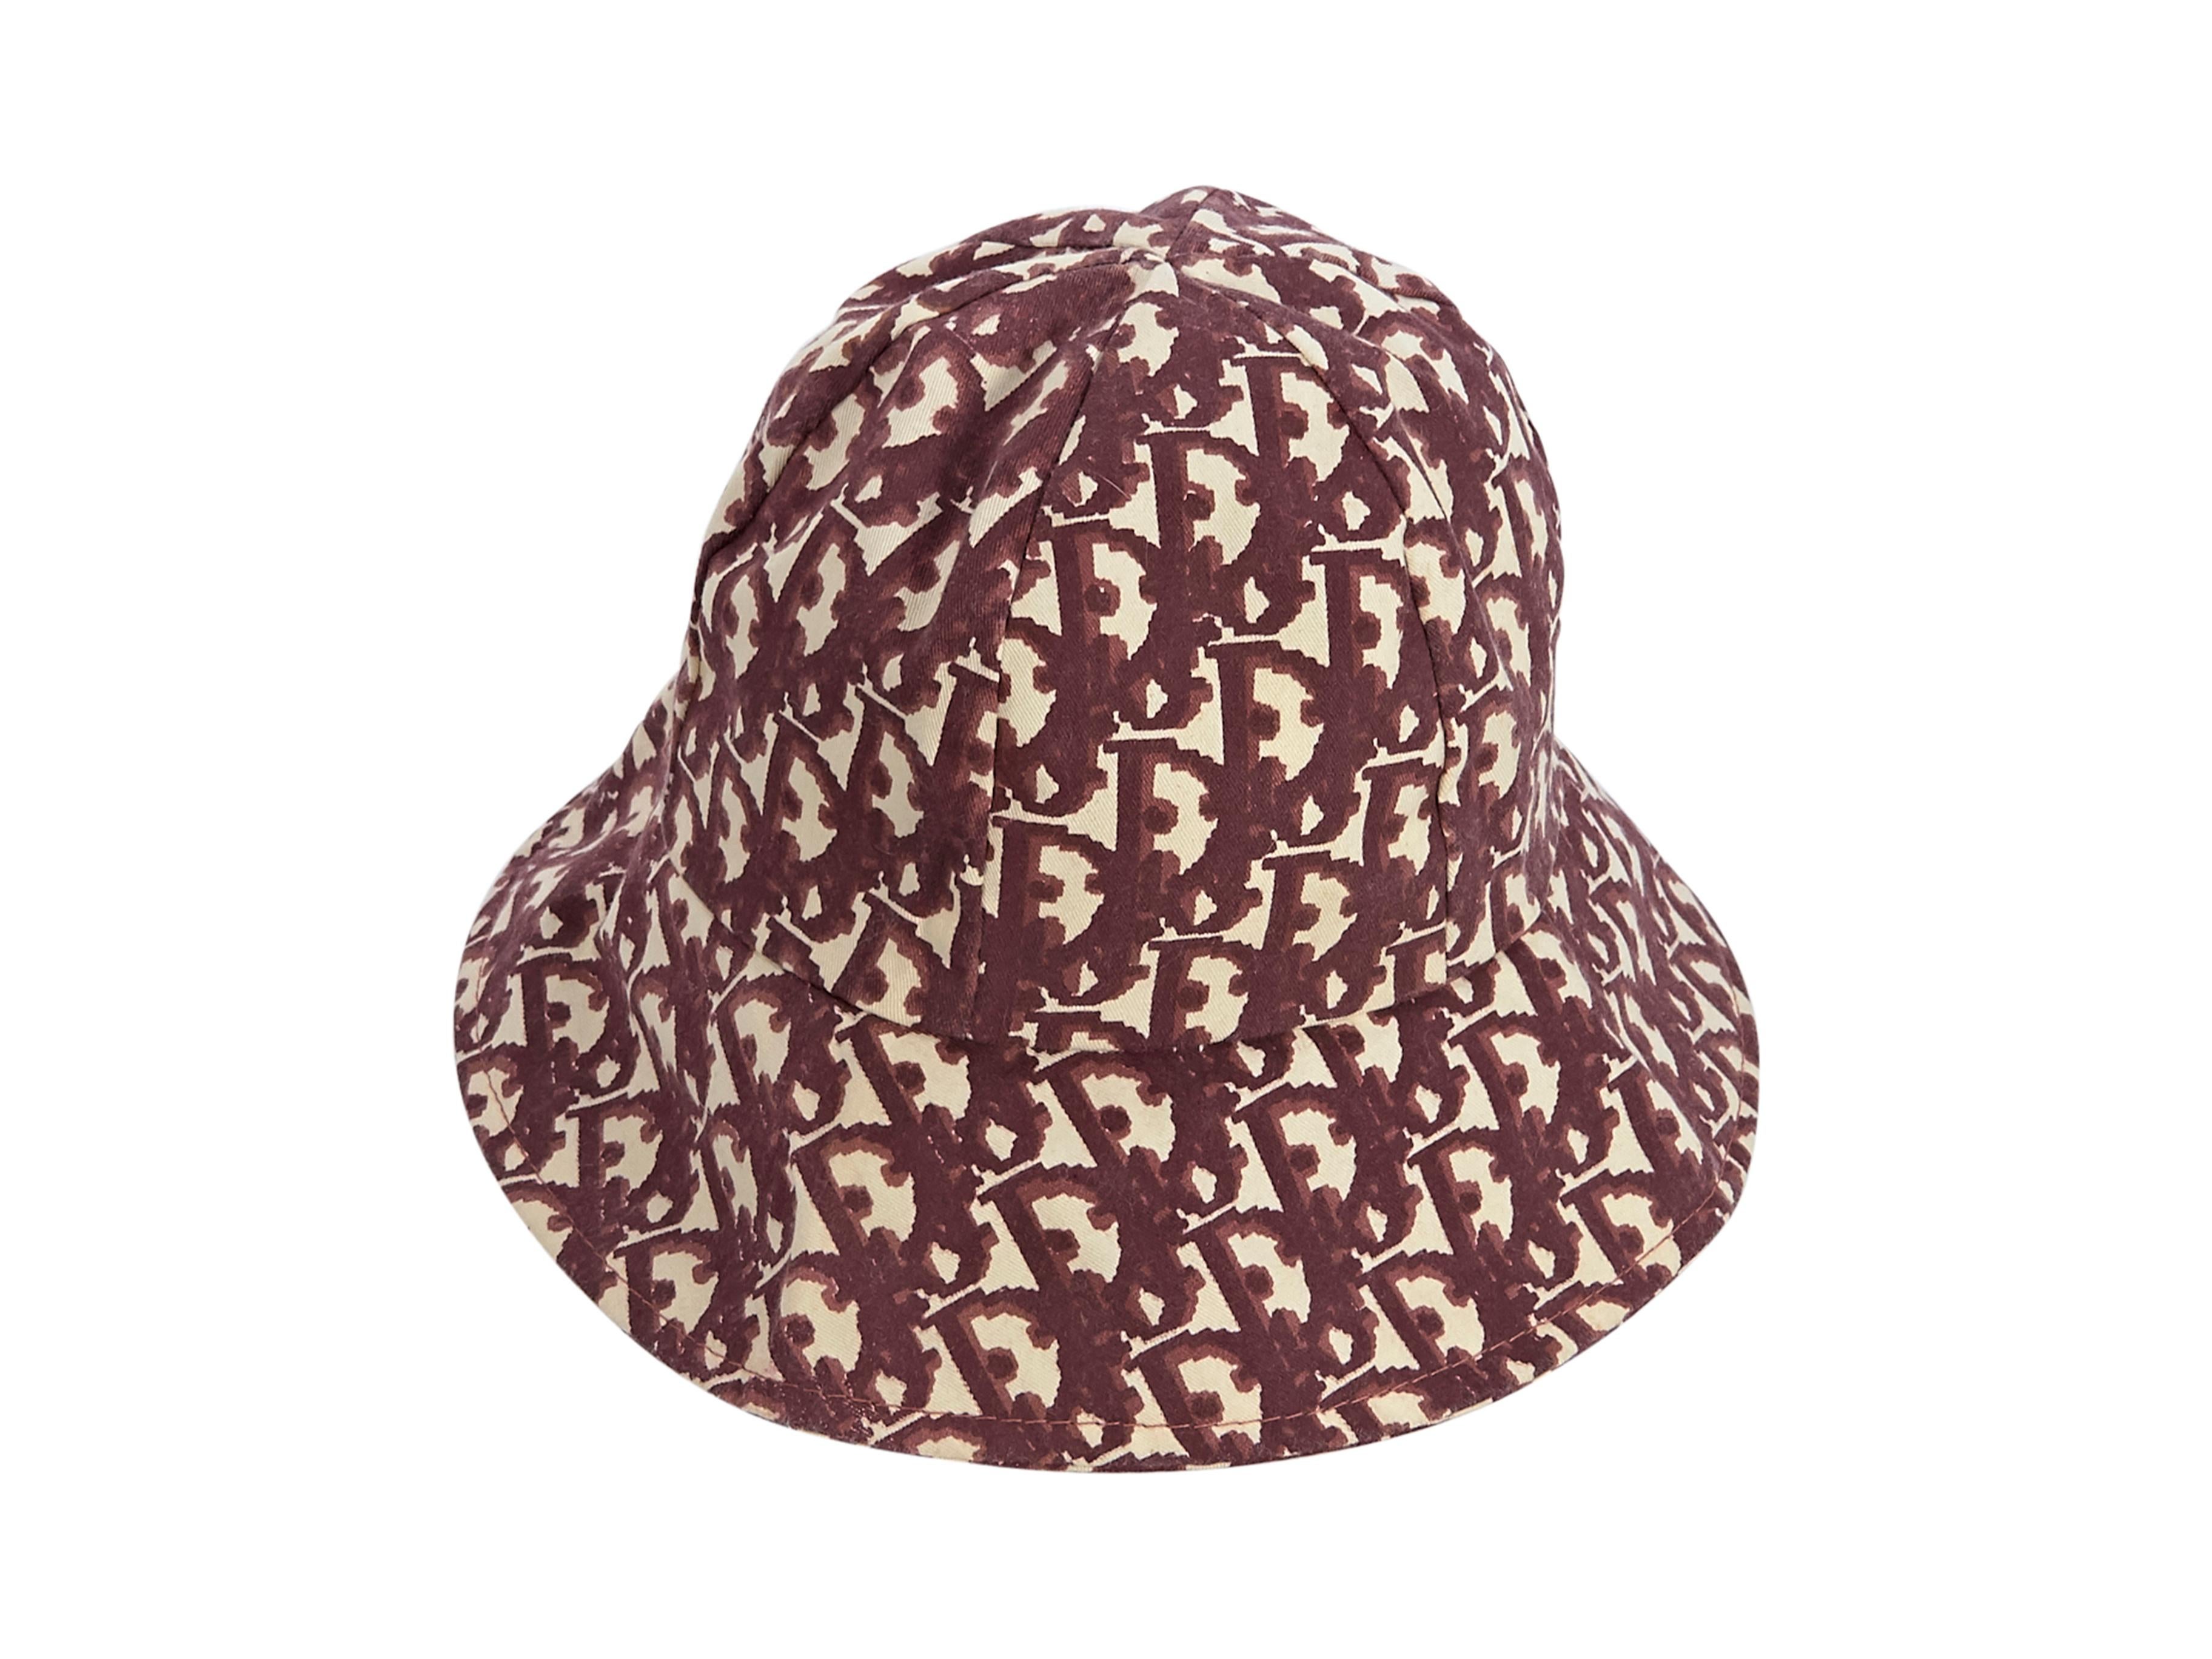 Product details:  Vintage red and cream Diorissimo bucket hat by Christian Dior.  Water repellent design.  Lined interior.  25.25